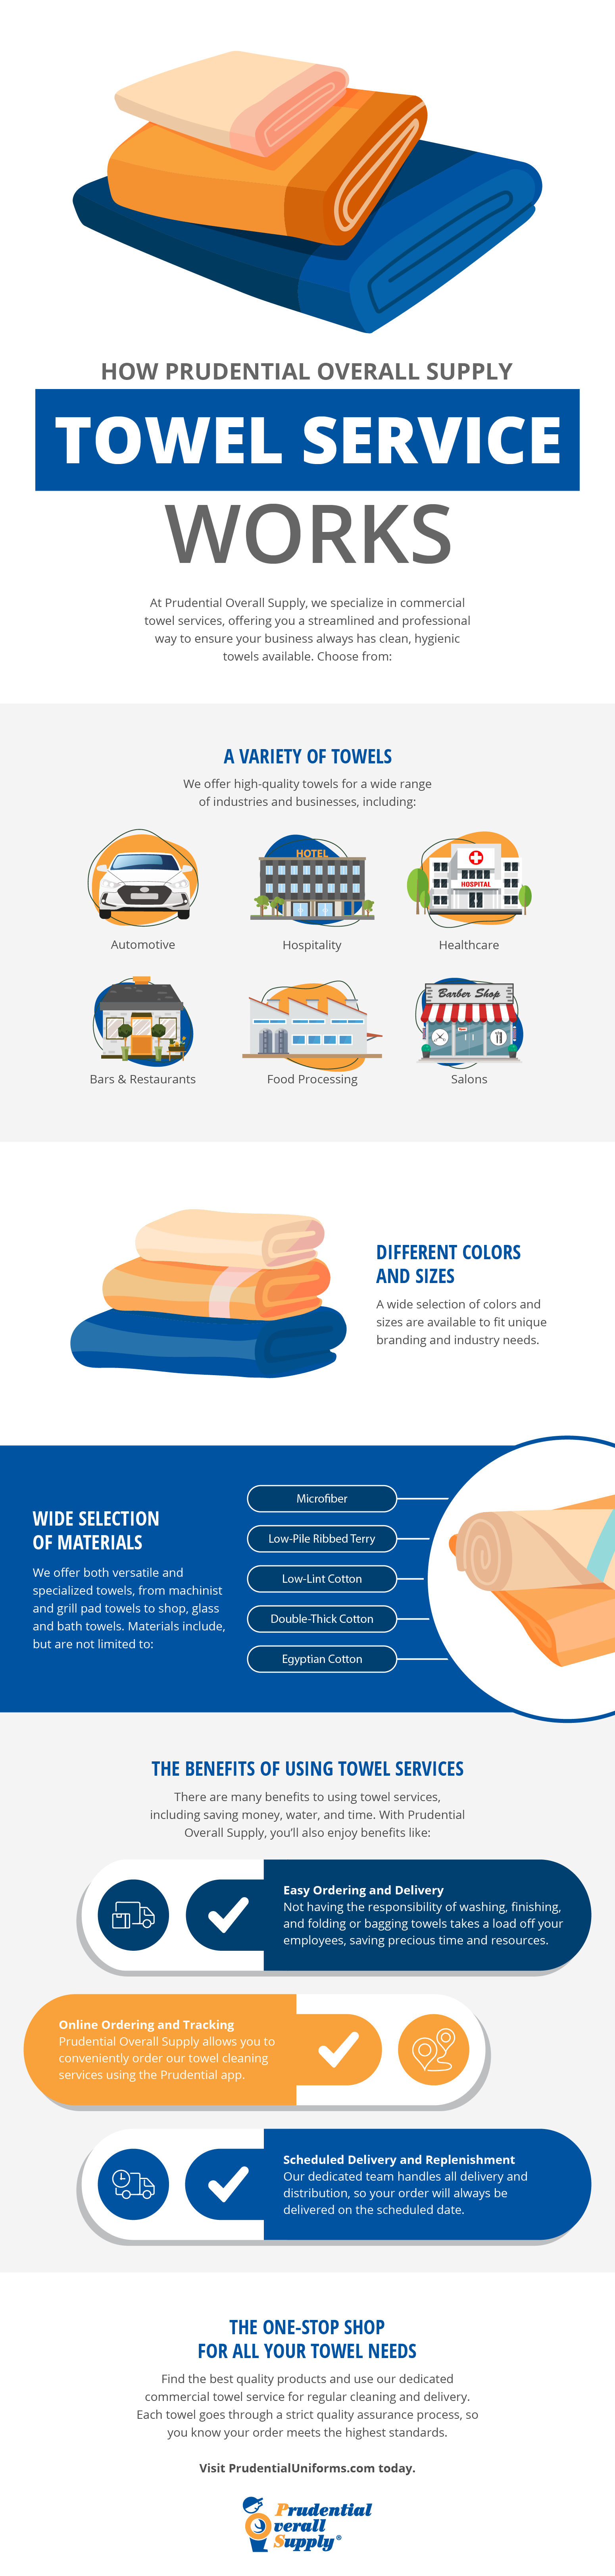 Prudential Overall Supply Towel Service Infographic